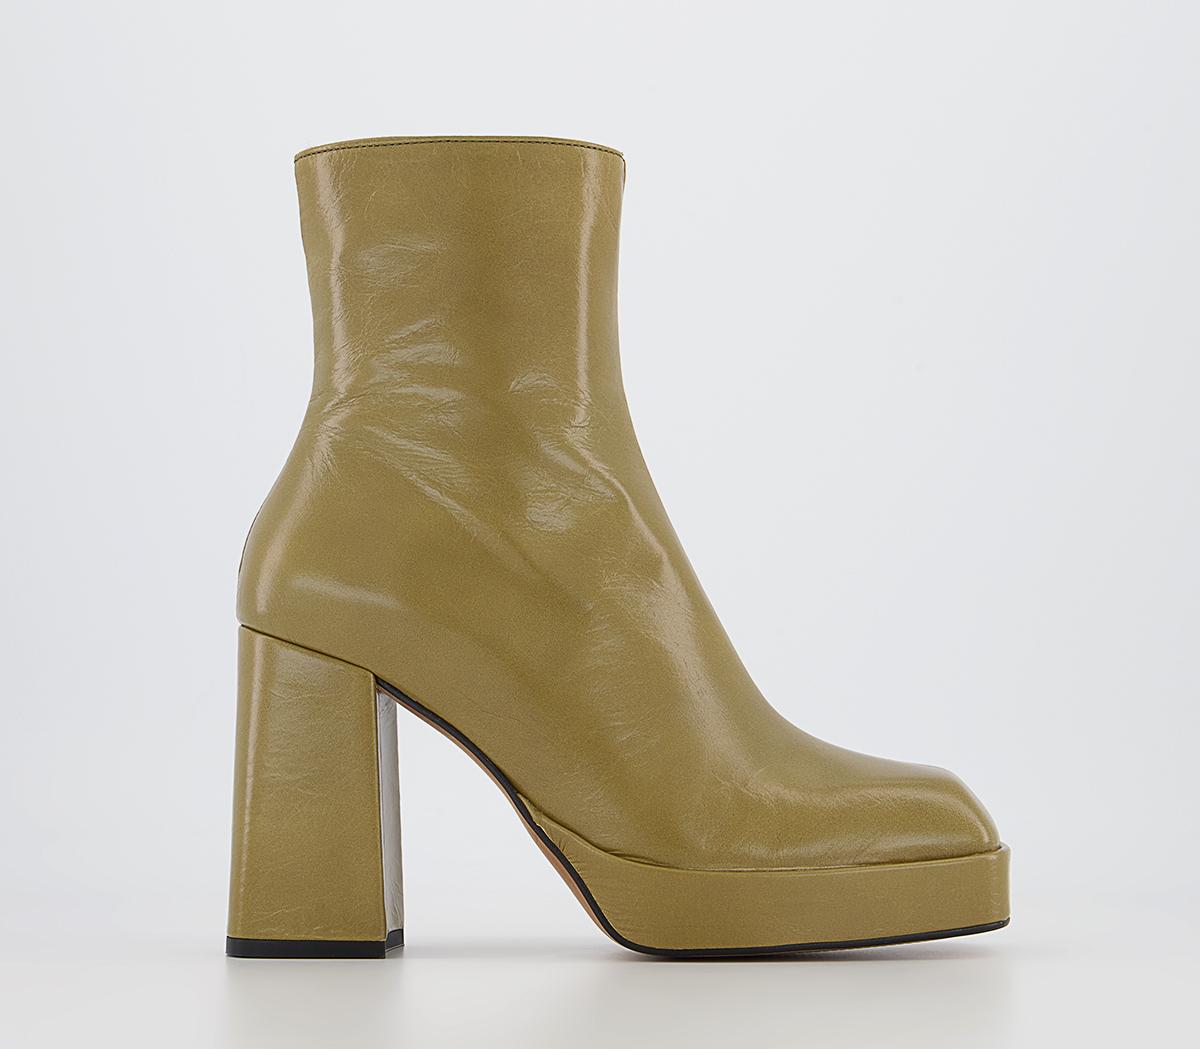 OFFICEAttitude Square Toe Platform Ankle BootsGreen Leather